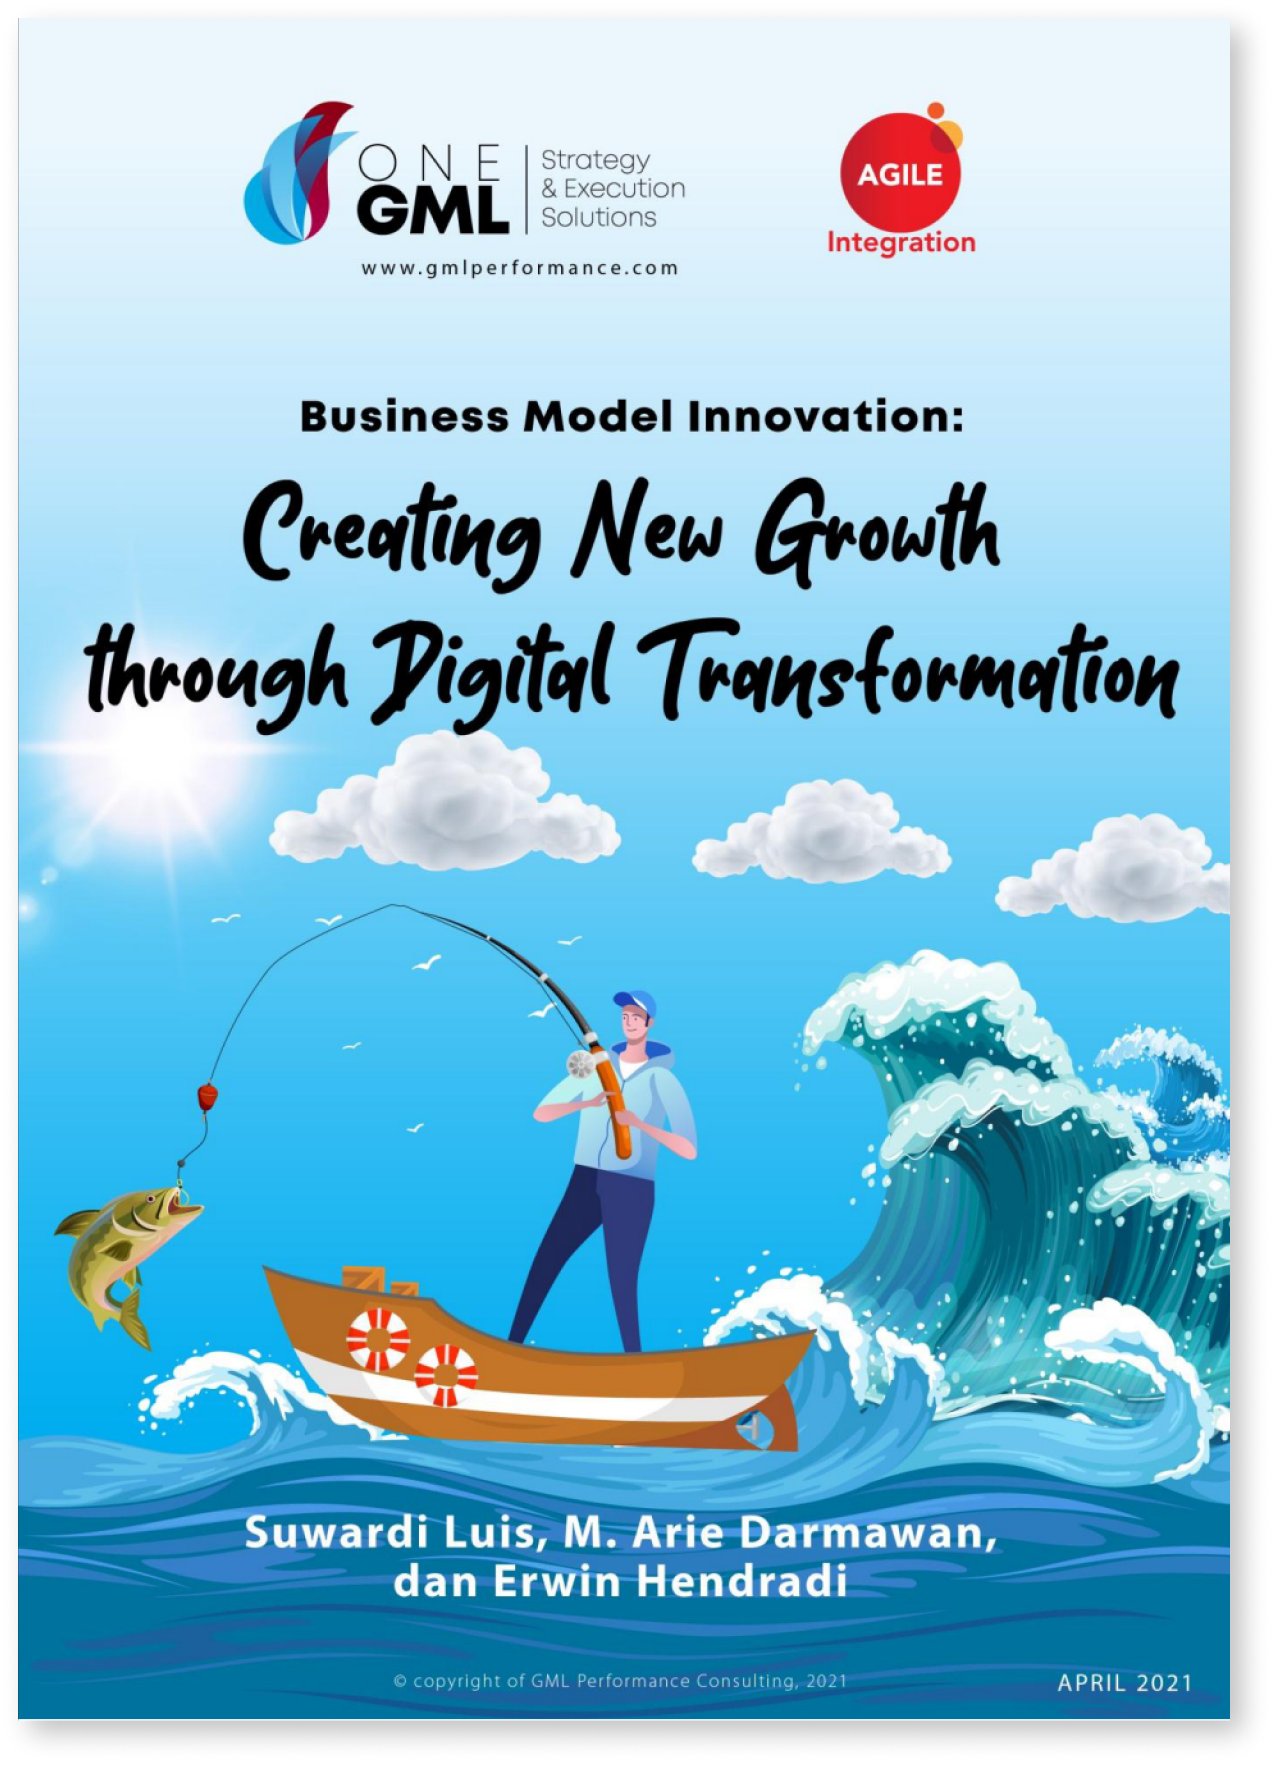 Business Model Innovation: Creating New Growth thought Digital Transformation